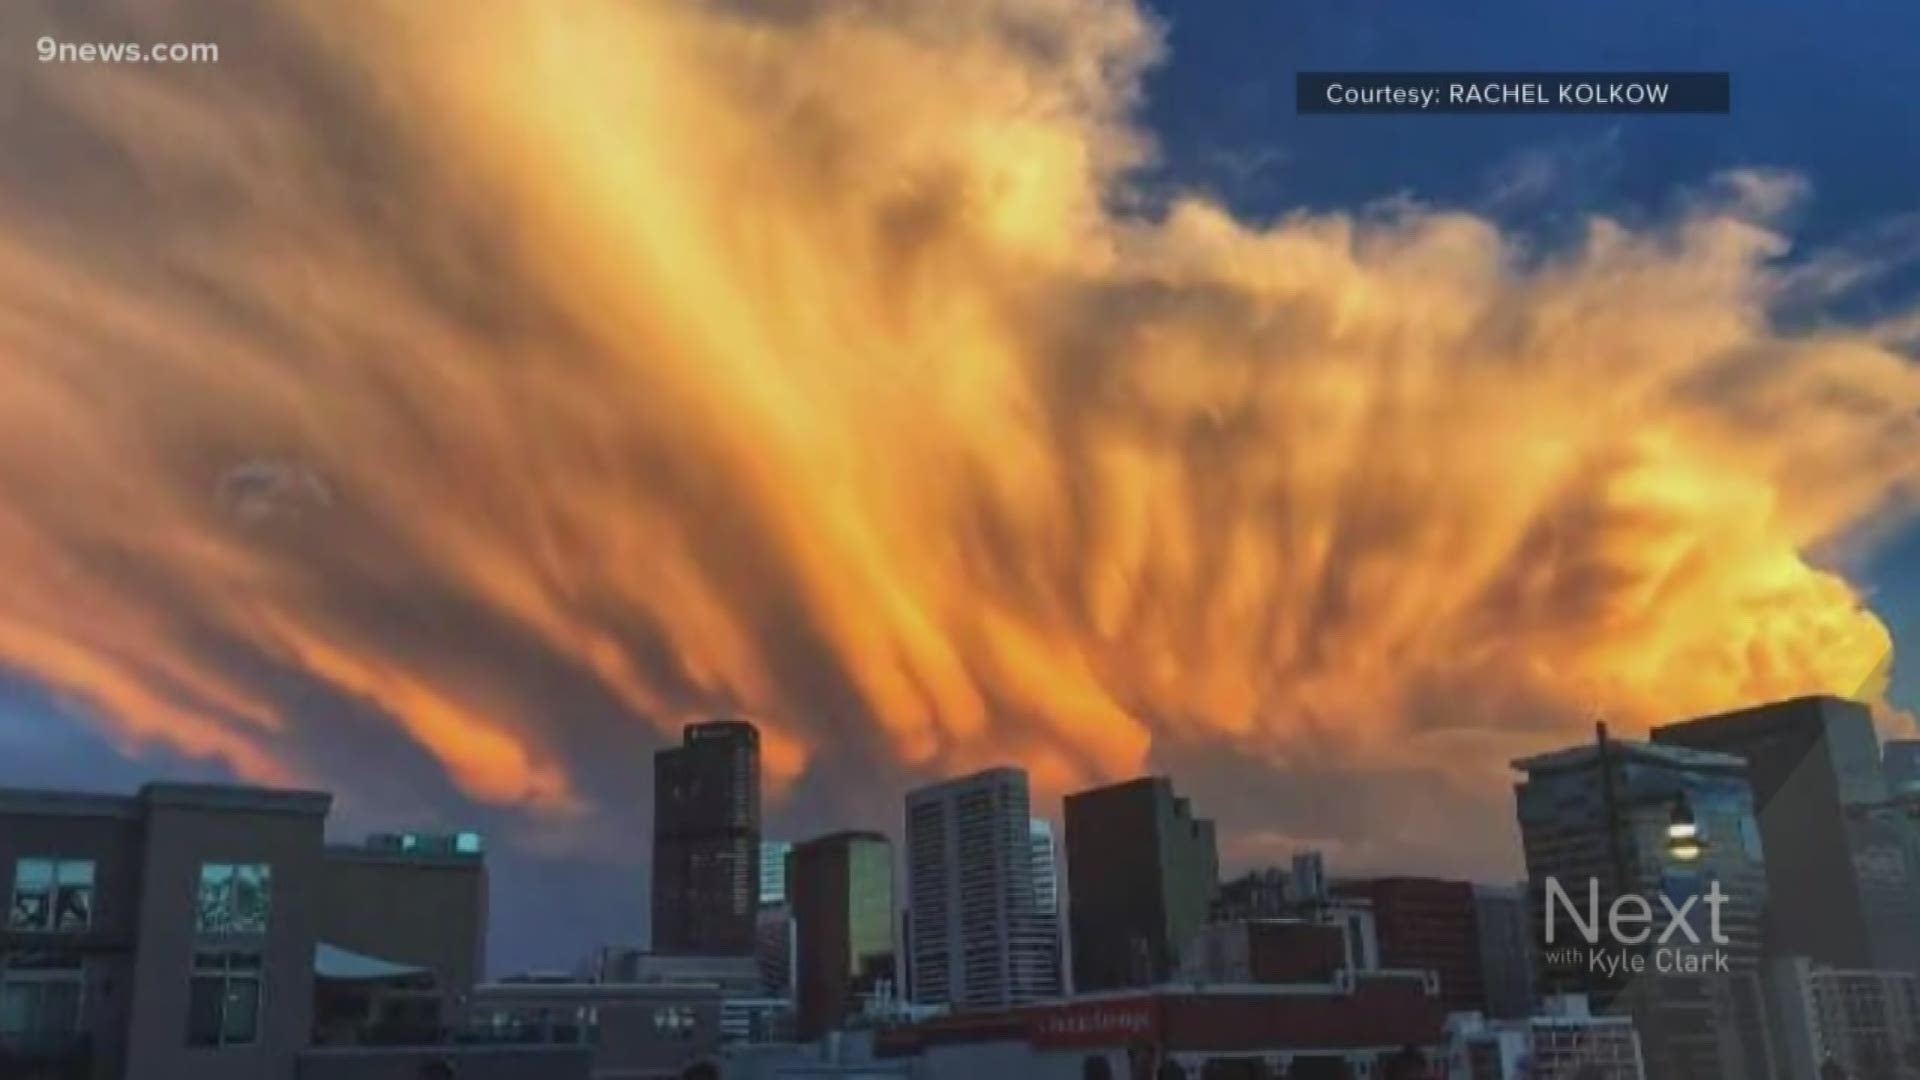 Lots of viewers were stunned by the clouds in the sky during the sunset Monday night. They're called cumulonimbus or mammatus clouds, and they make for some dramatic views.